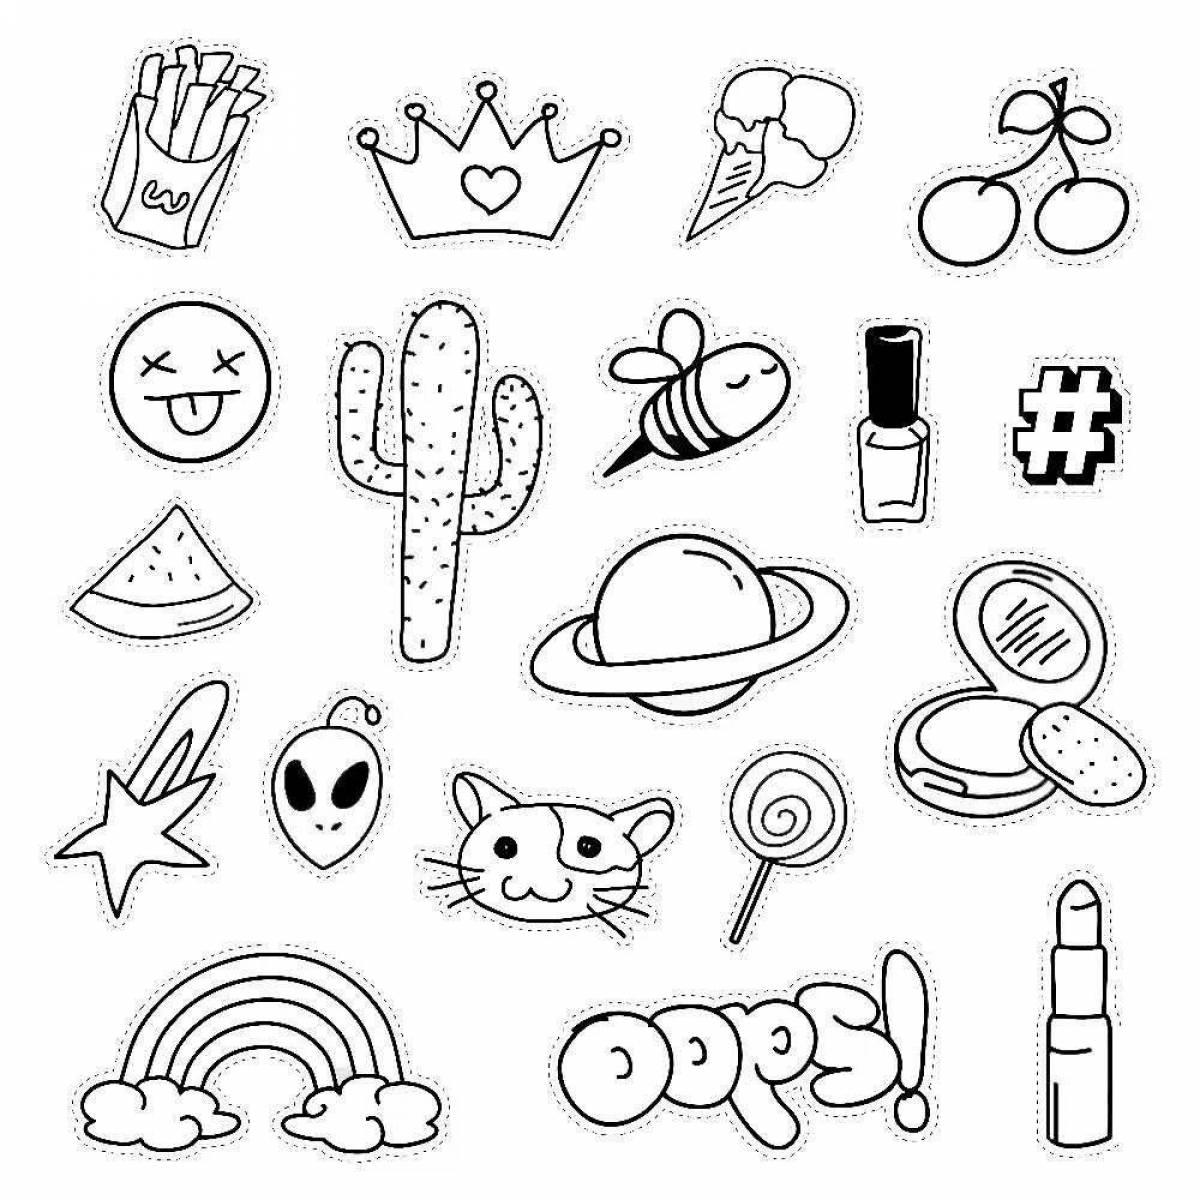 Amazing coloring pages with stickers